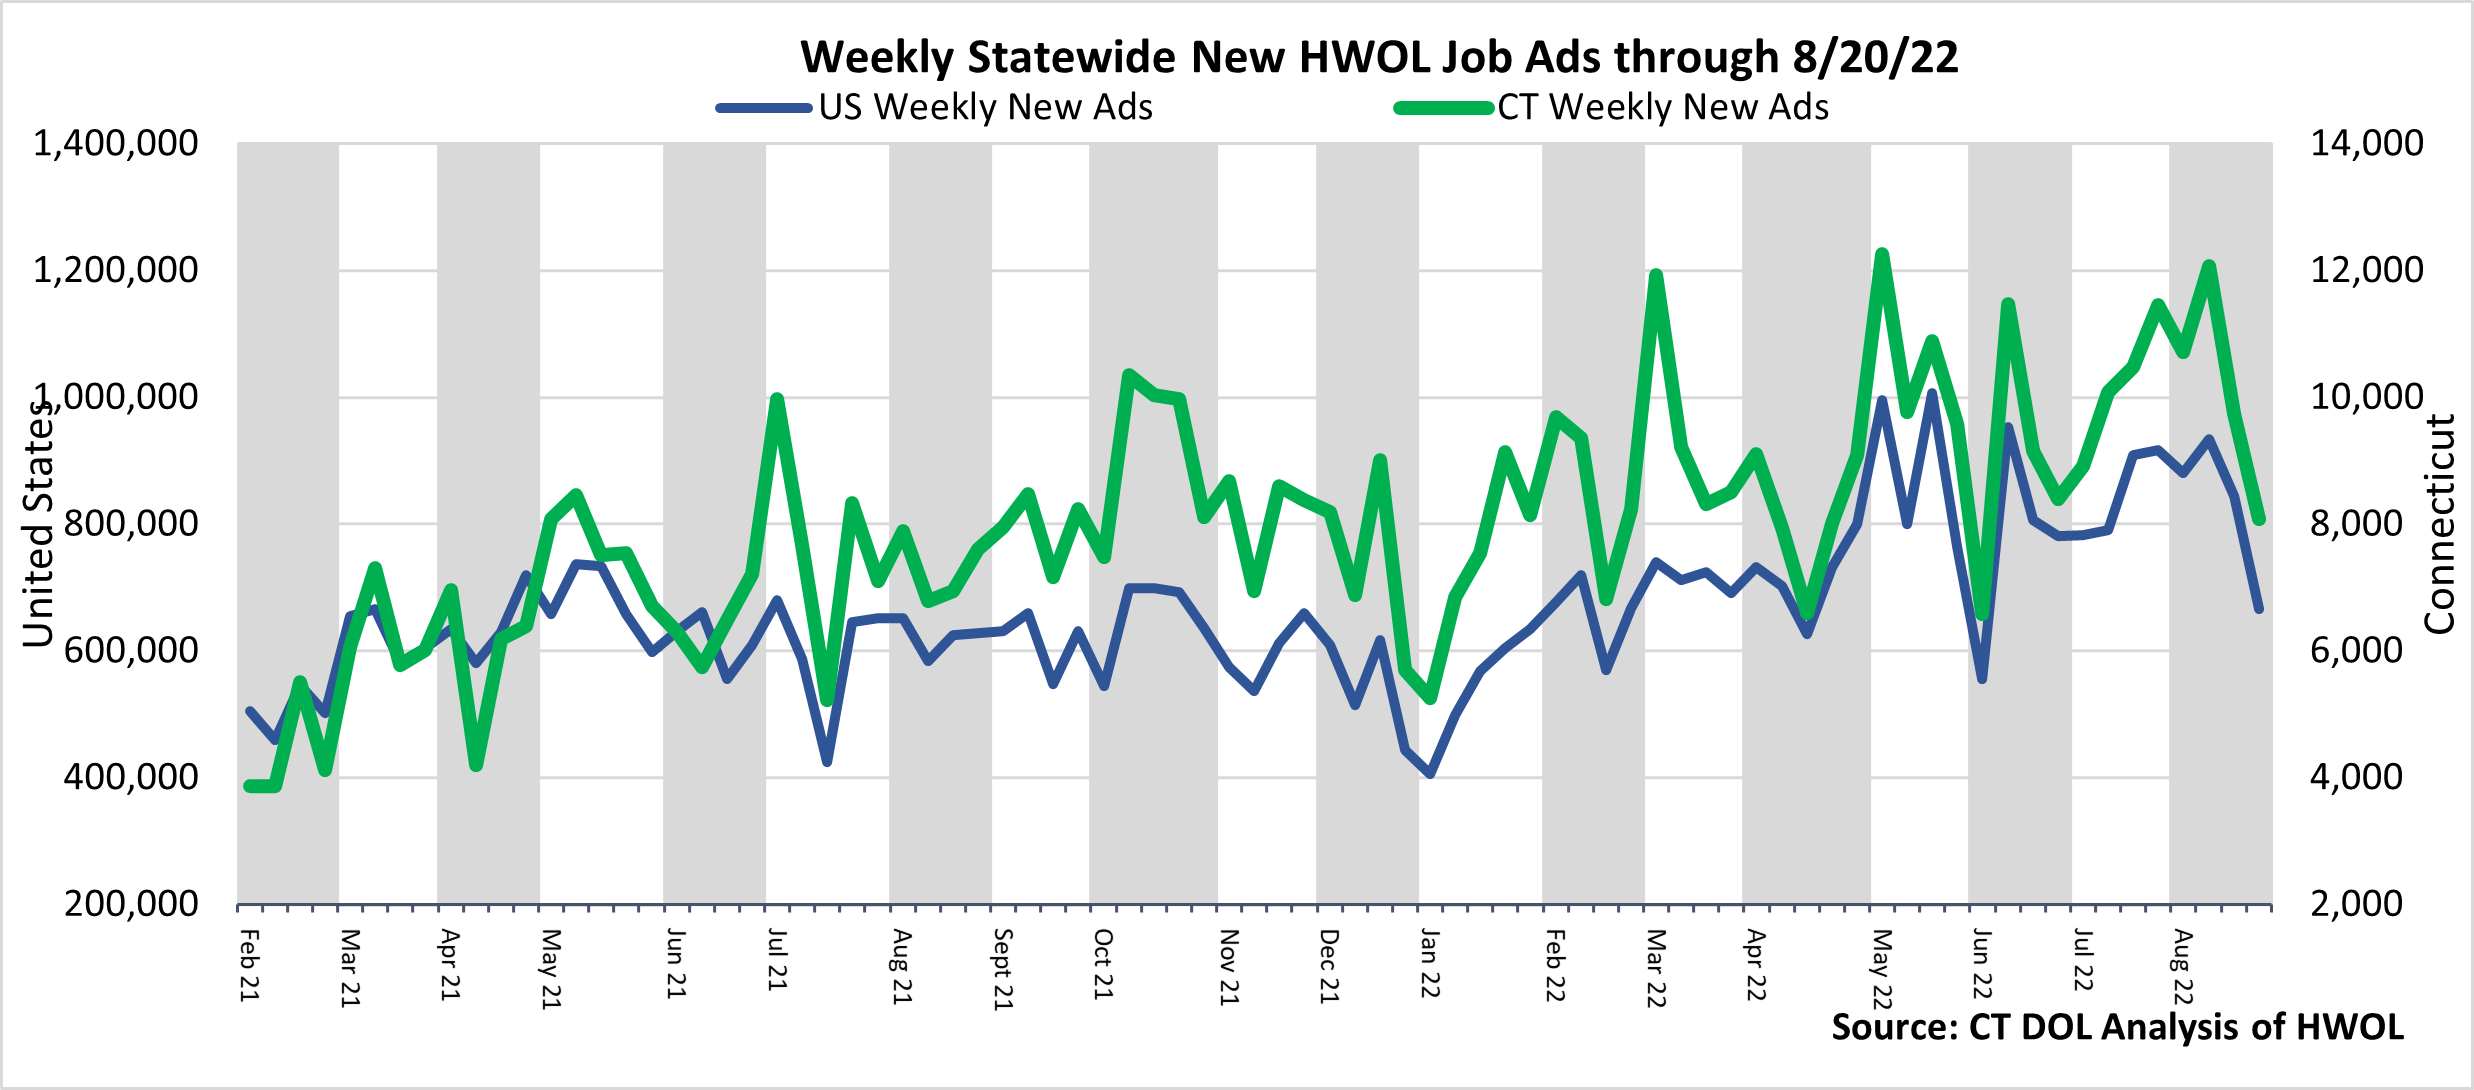 Connecticut Weekly Statewide New HWOL Job Ads through 08/20/22